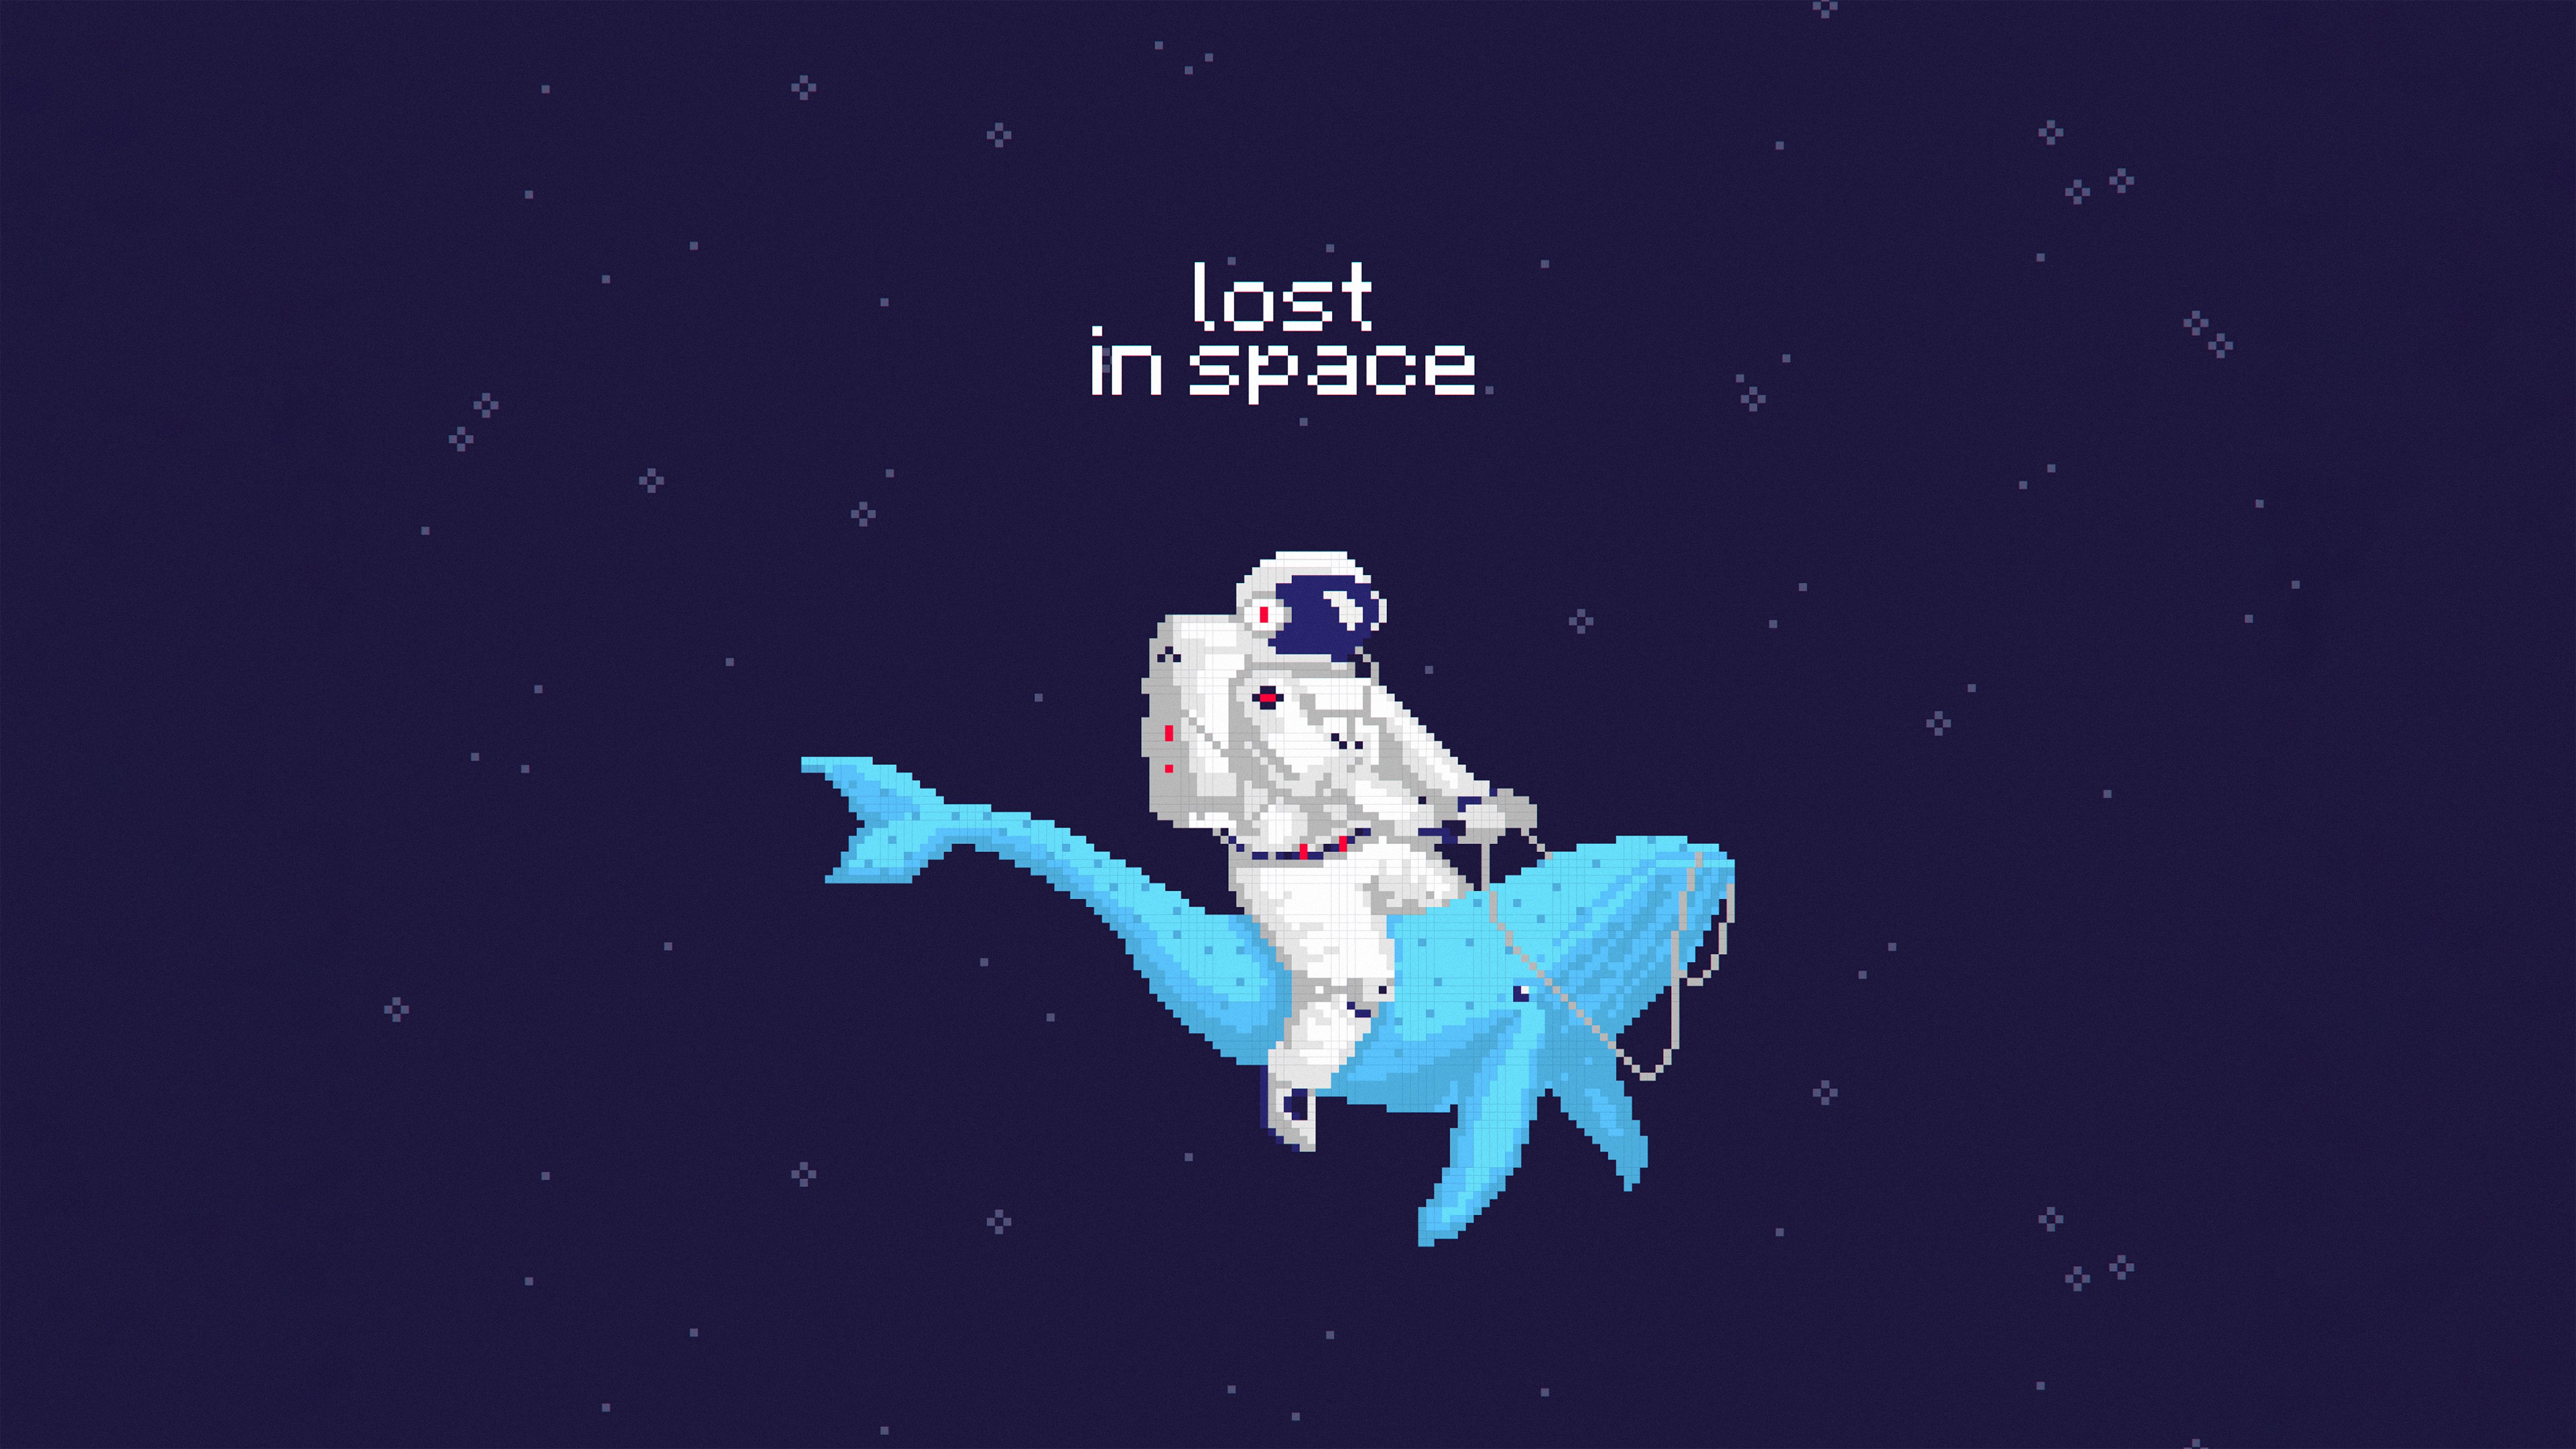 An astronaut is riding a whale in space. - Pixel art